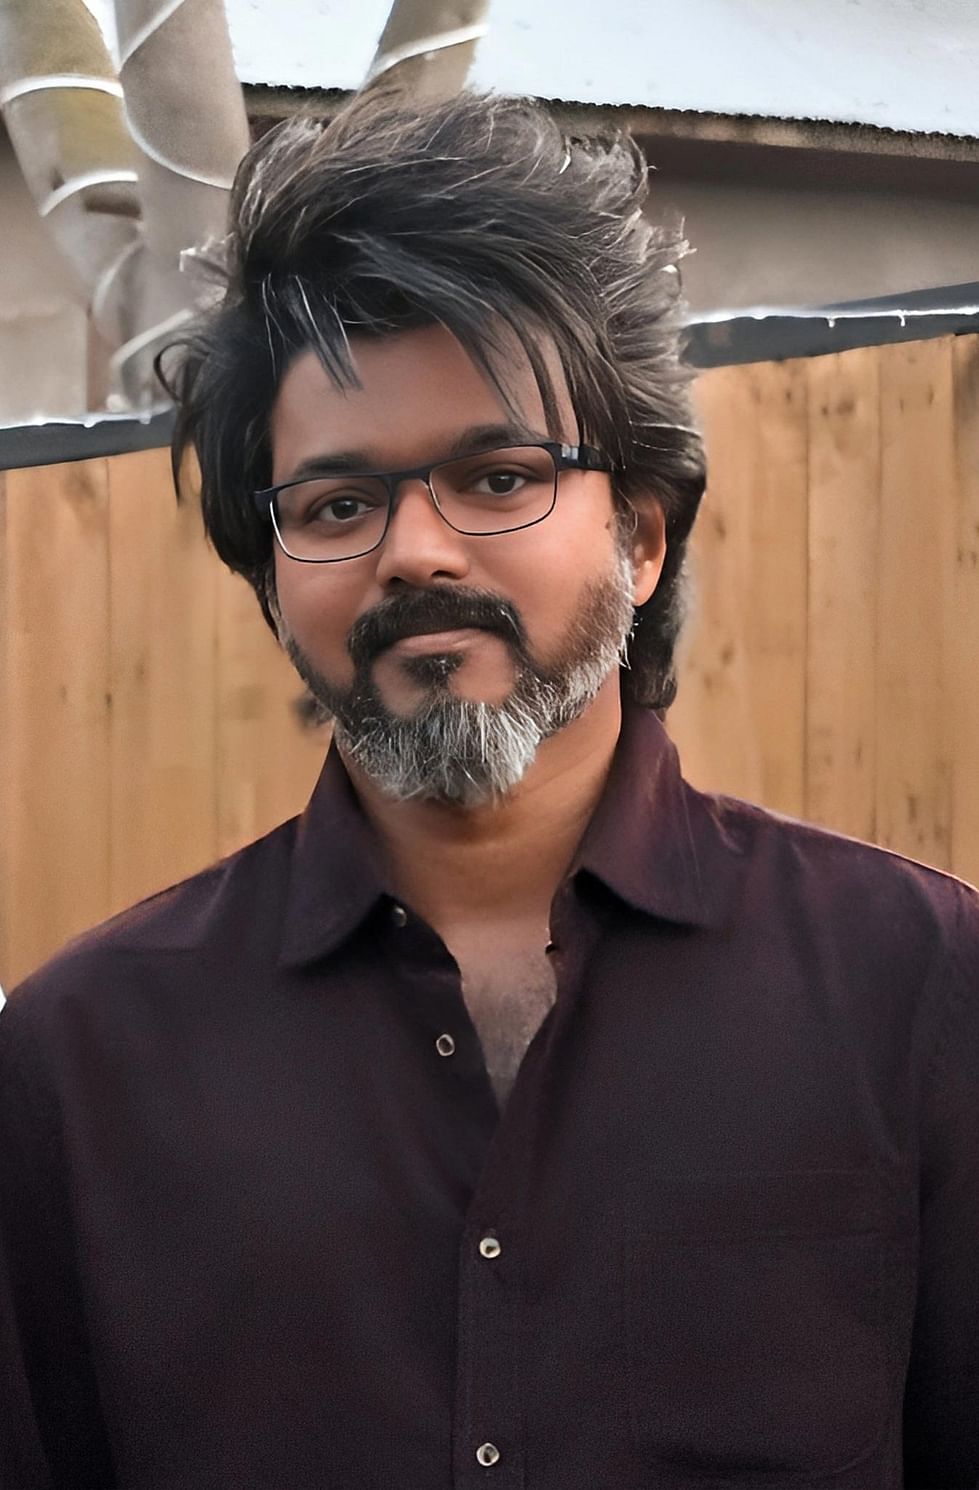 Whoa! The secret behind Thalapathy Vijay's mass hairstyle in 'Leo' revealed